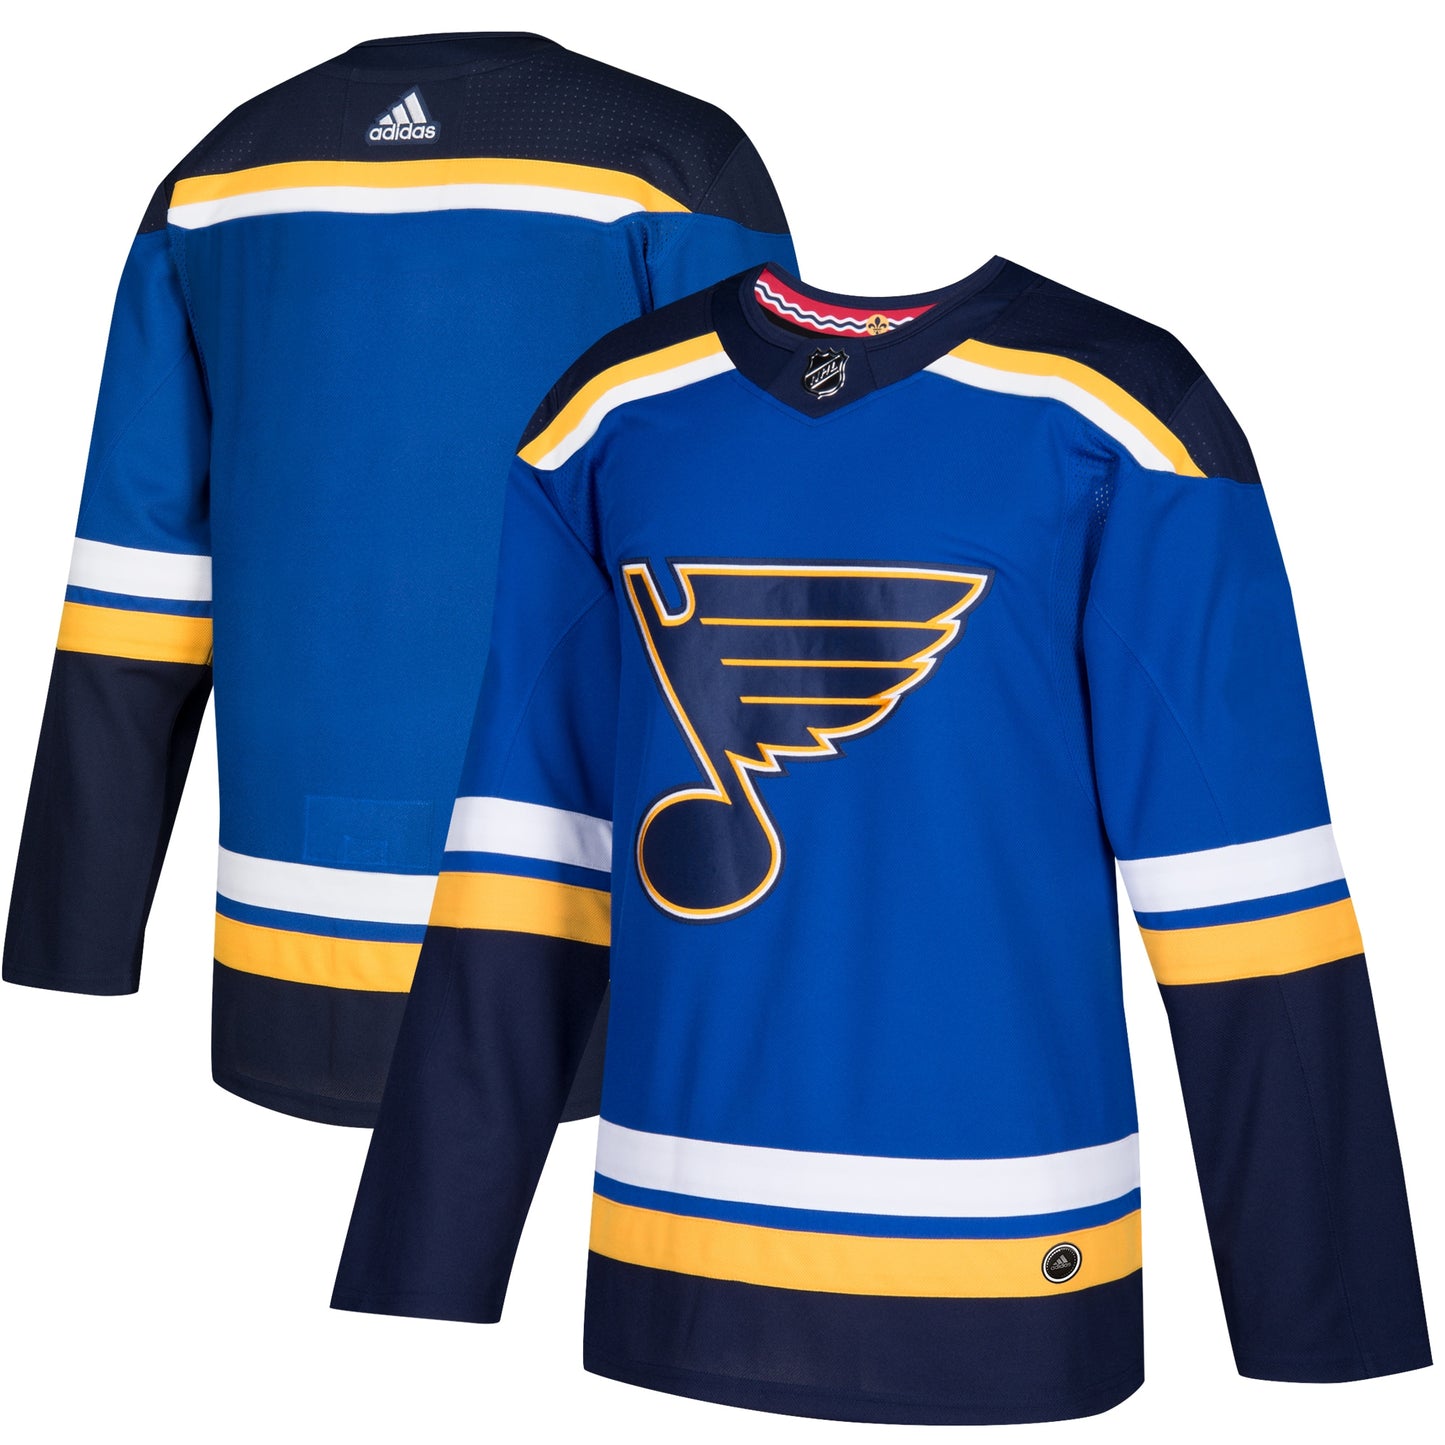 St. Louis Blues adidas Home Authentic Blank Jersey - Blue